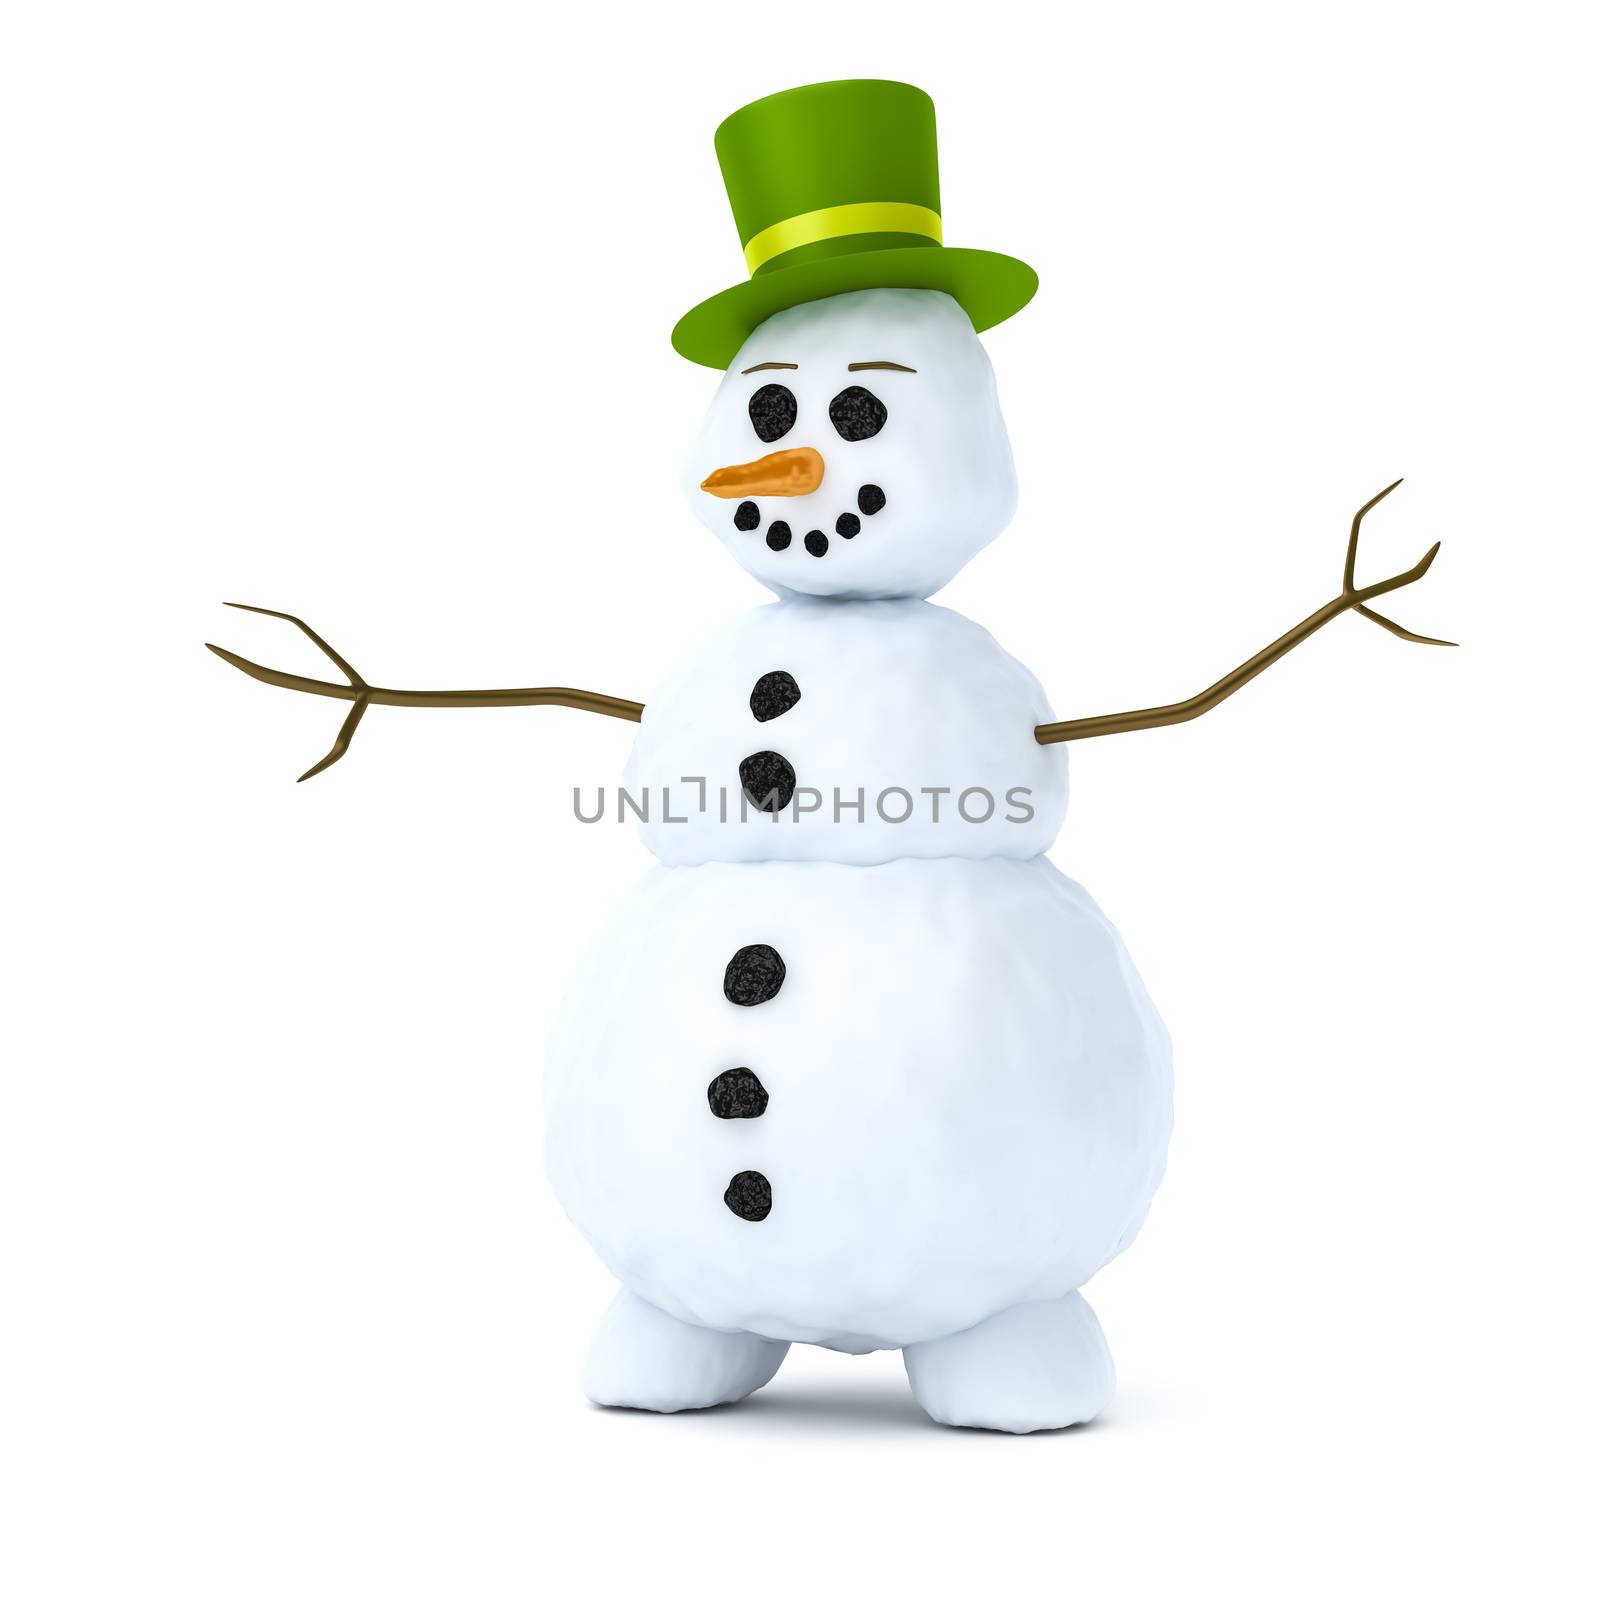 An image of a snowman with a green hat